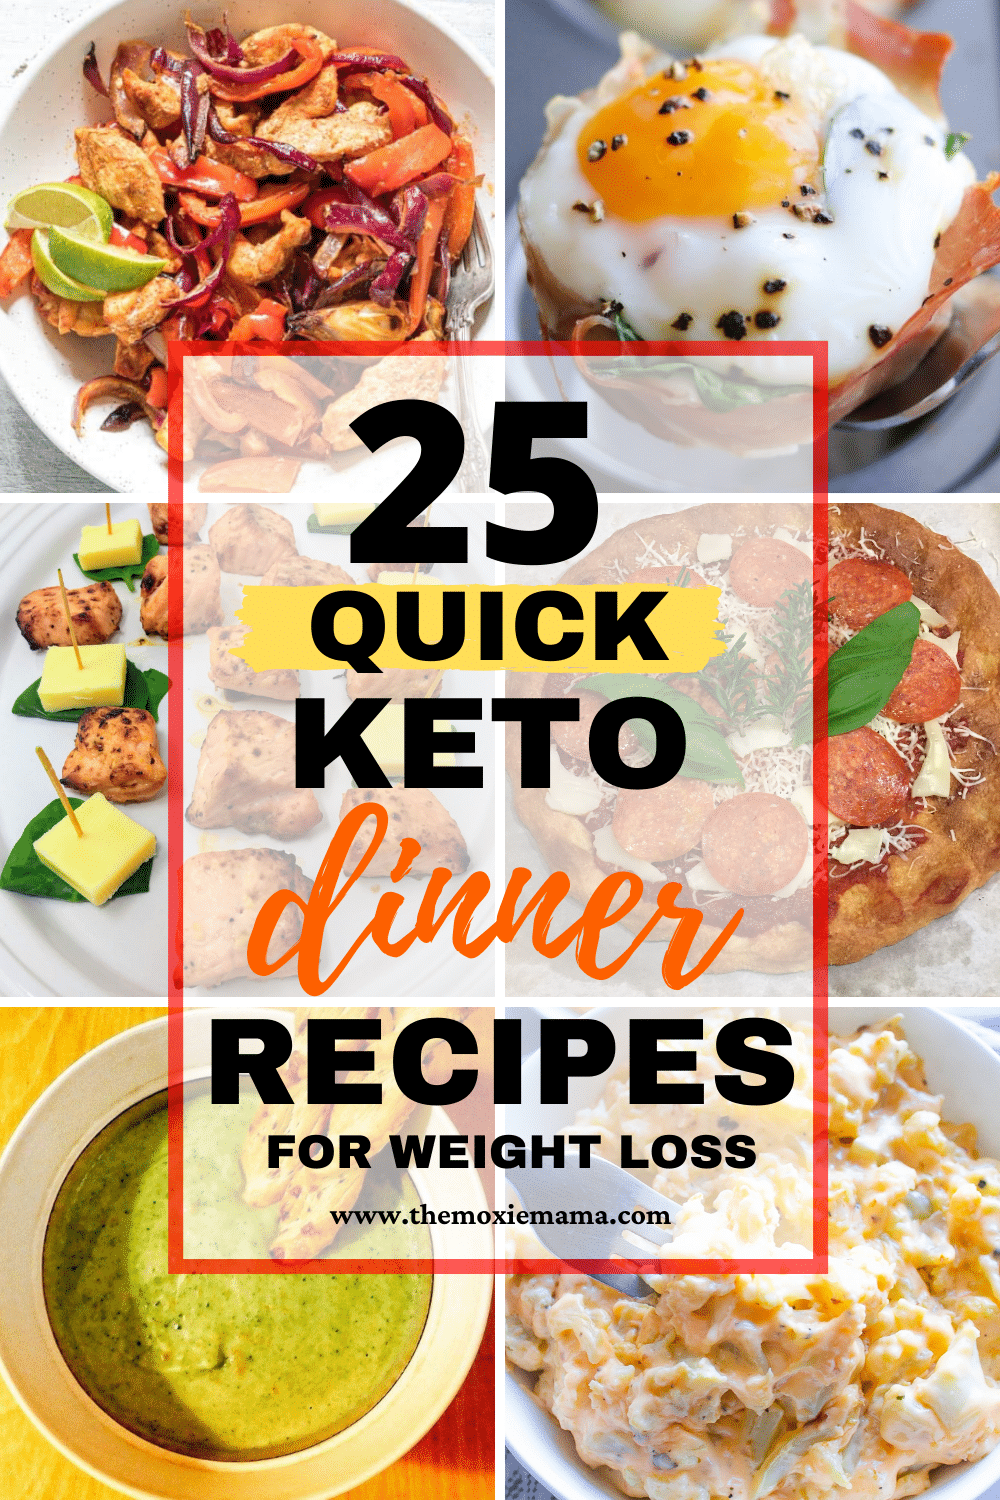 Quick keto recipes for dinner. Whether you are looking for a healthy but tasty keto recipes for yourself, or you want to impress your family with a welcoming meal, these easy and satisfying keto recipes that will help you stay full for hours. These keto recipes are great for lunch or leftovers as well.